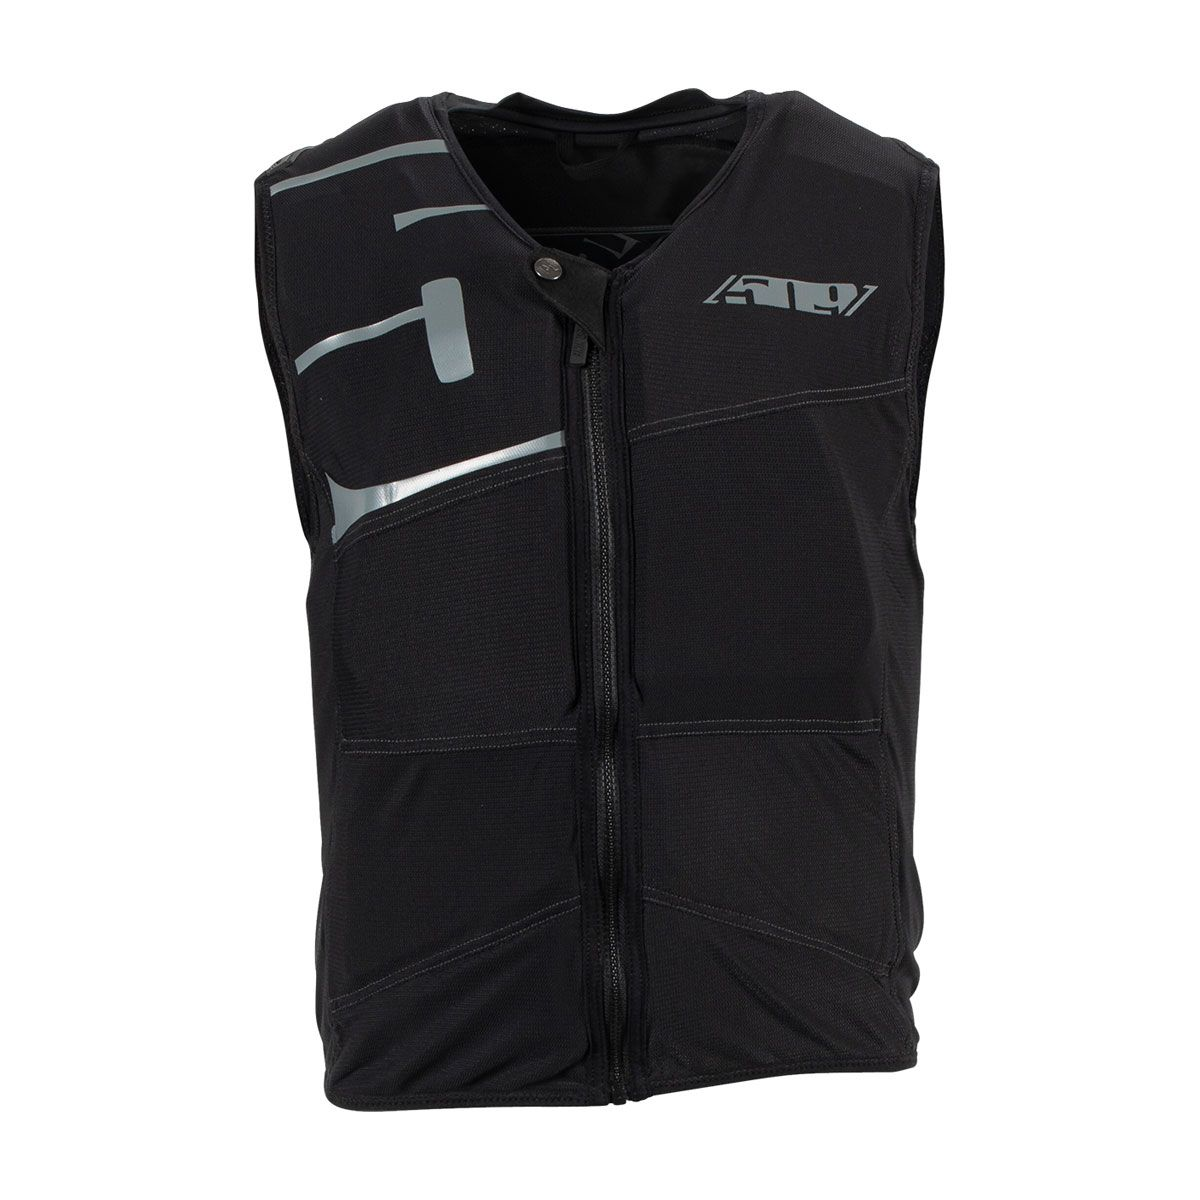  youth r mor protection vest